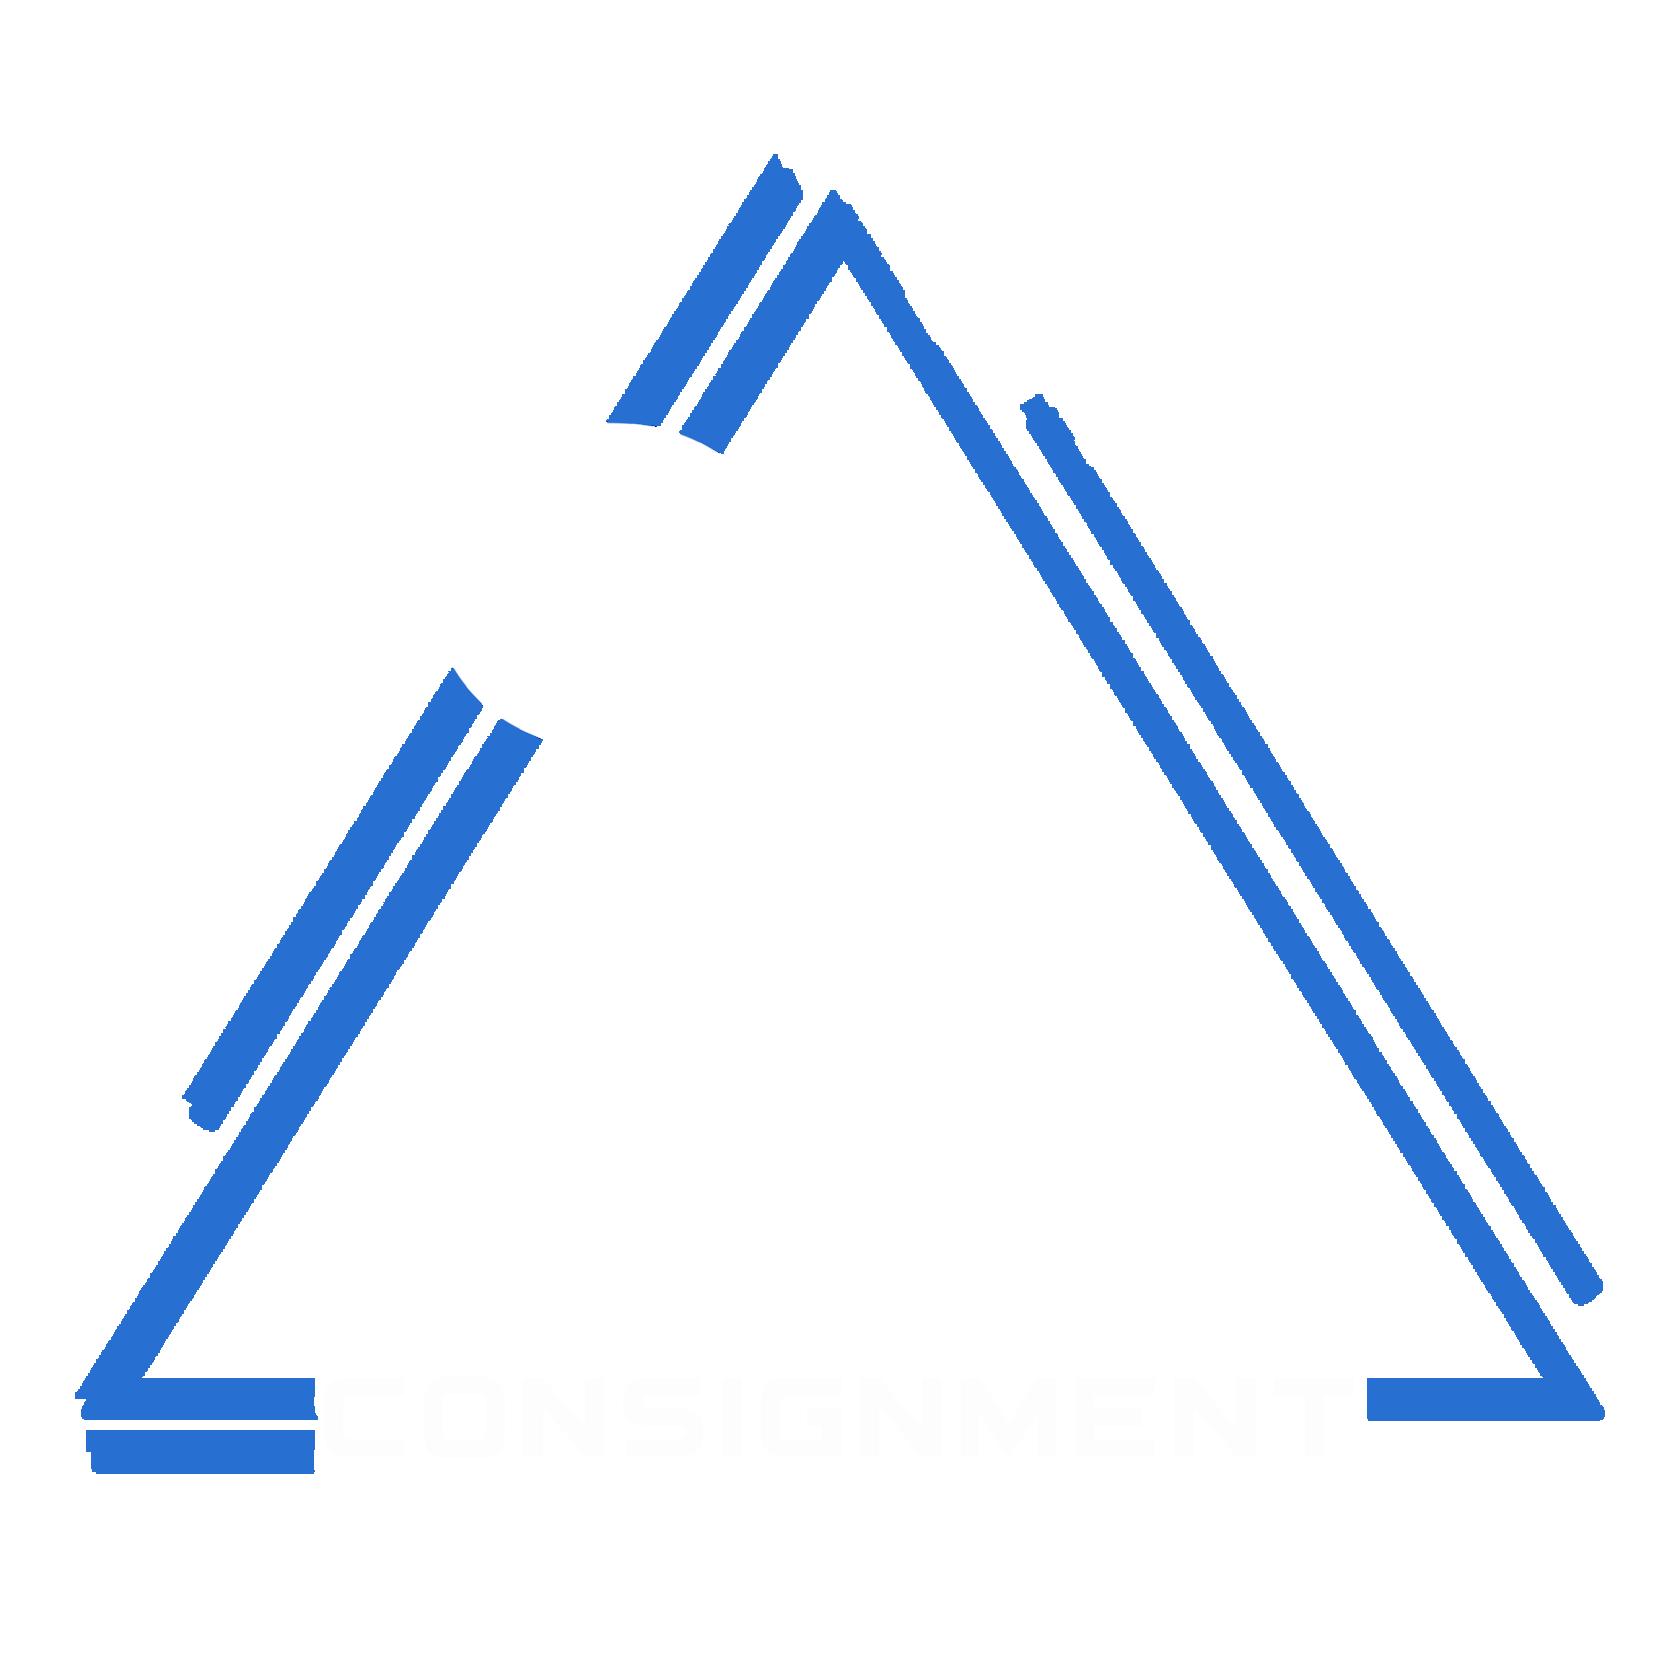 999Consignment